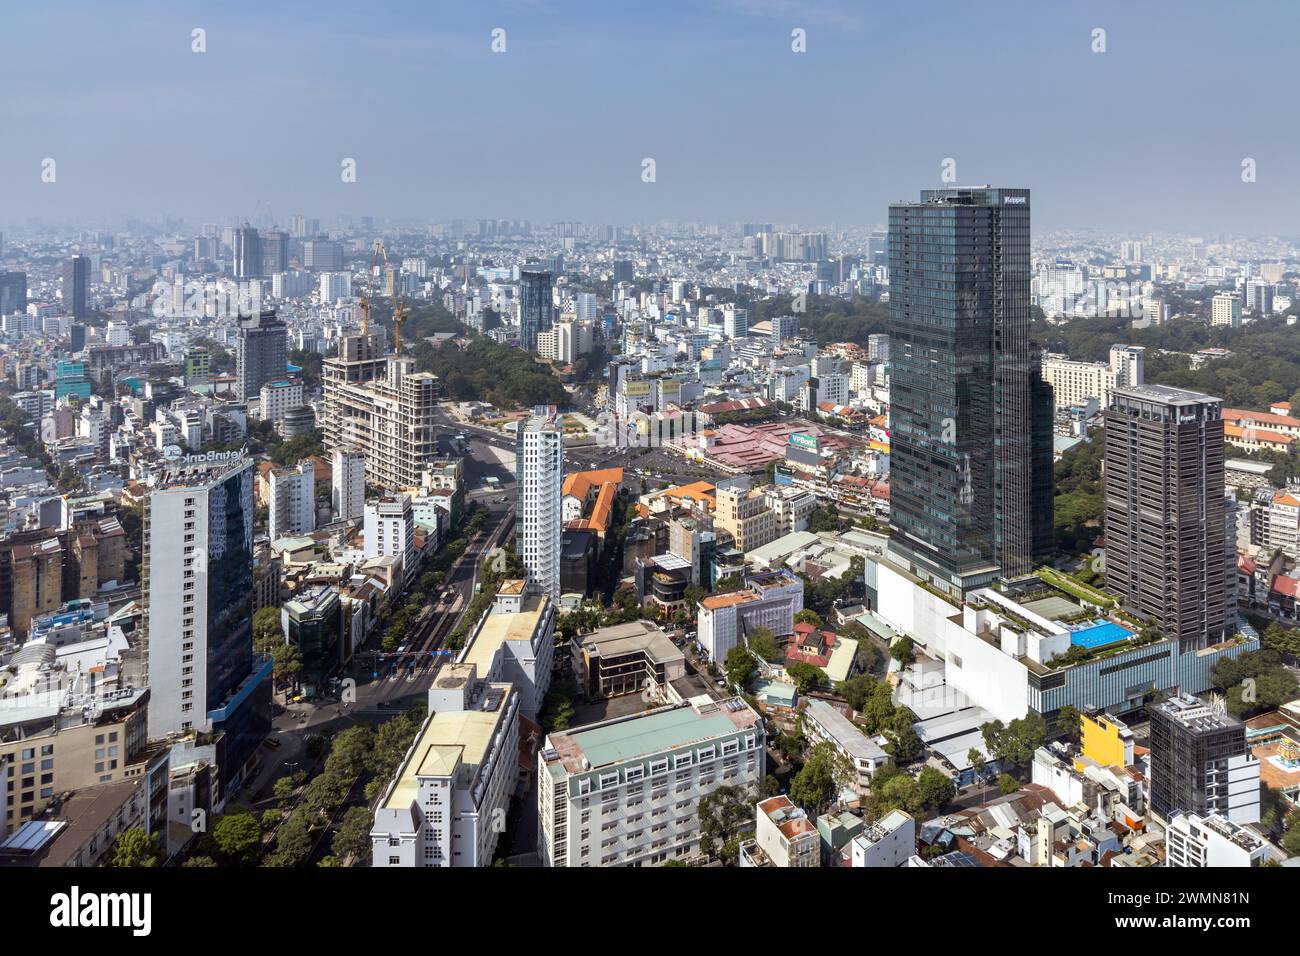 View of Ho Chi Minh City (Saigon) from the observation deck of the Bitexco financial tower, Vietnam Stock Photo